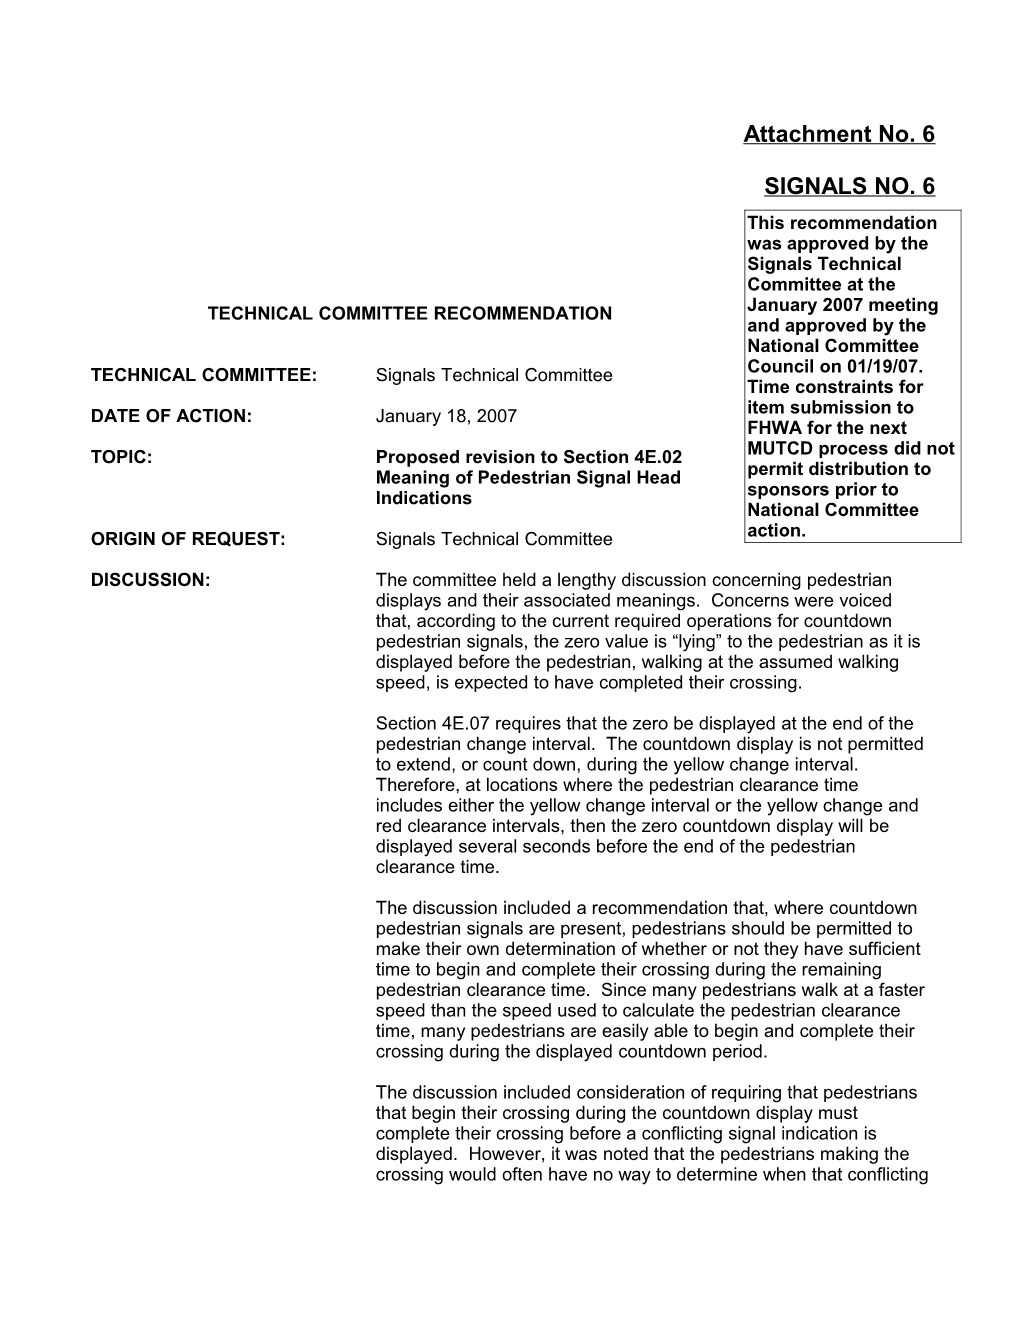 Technical Committee Recommendation s1